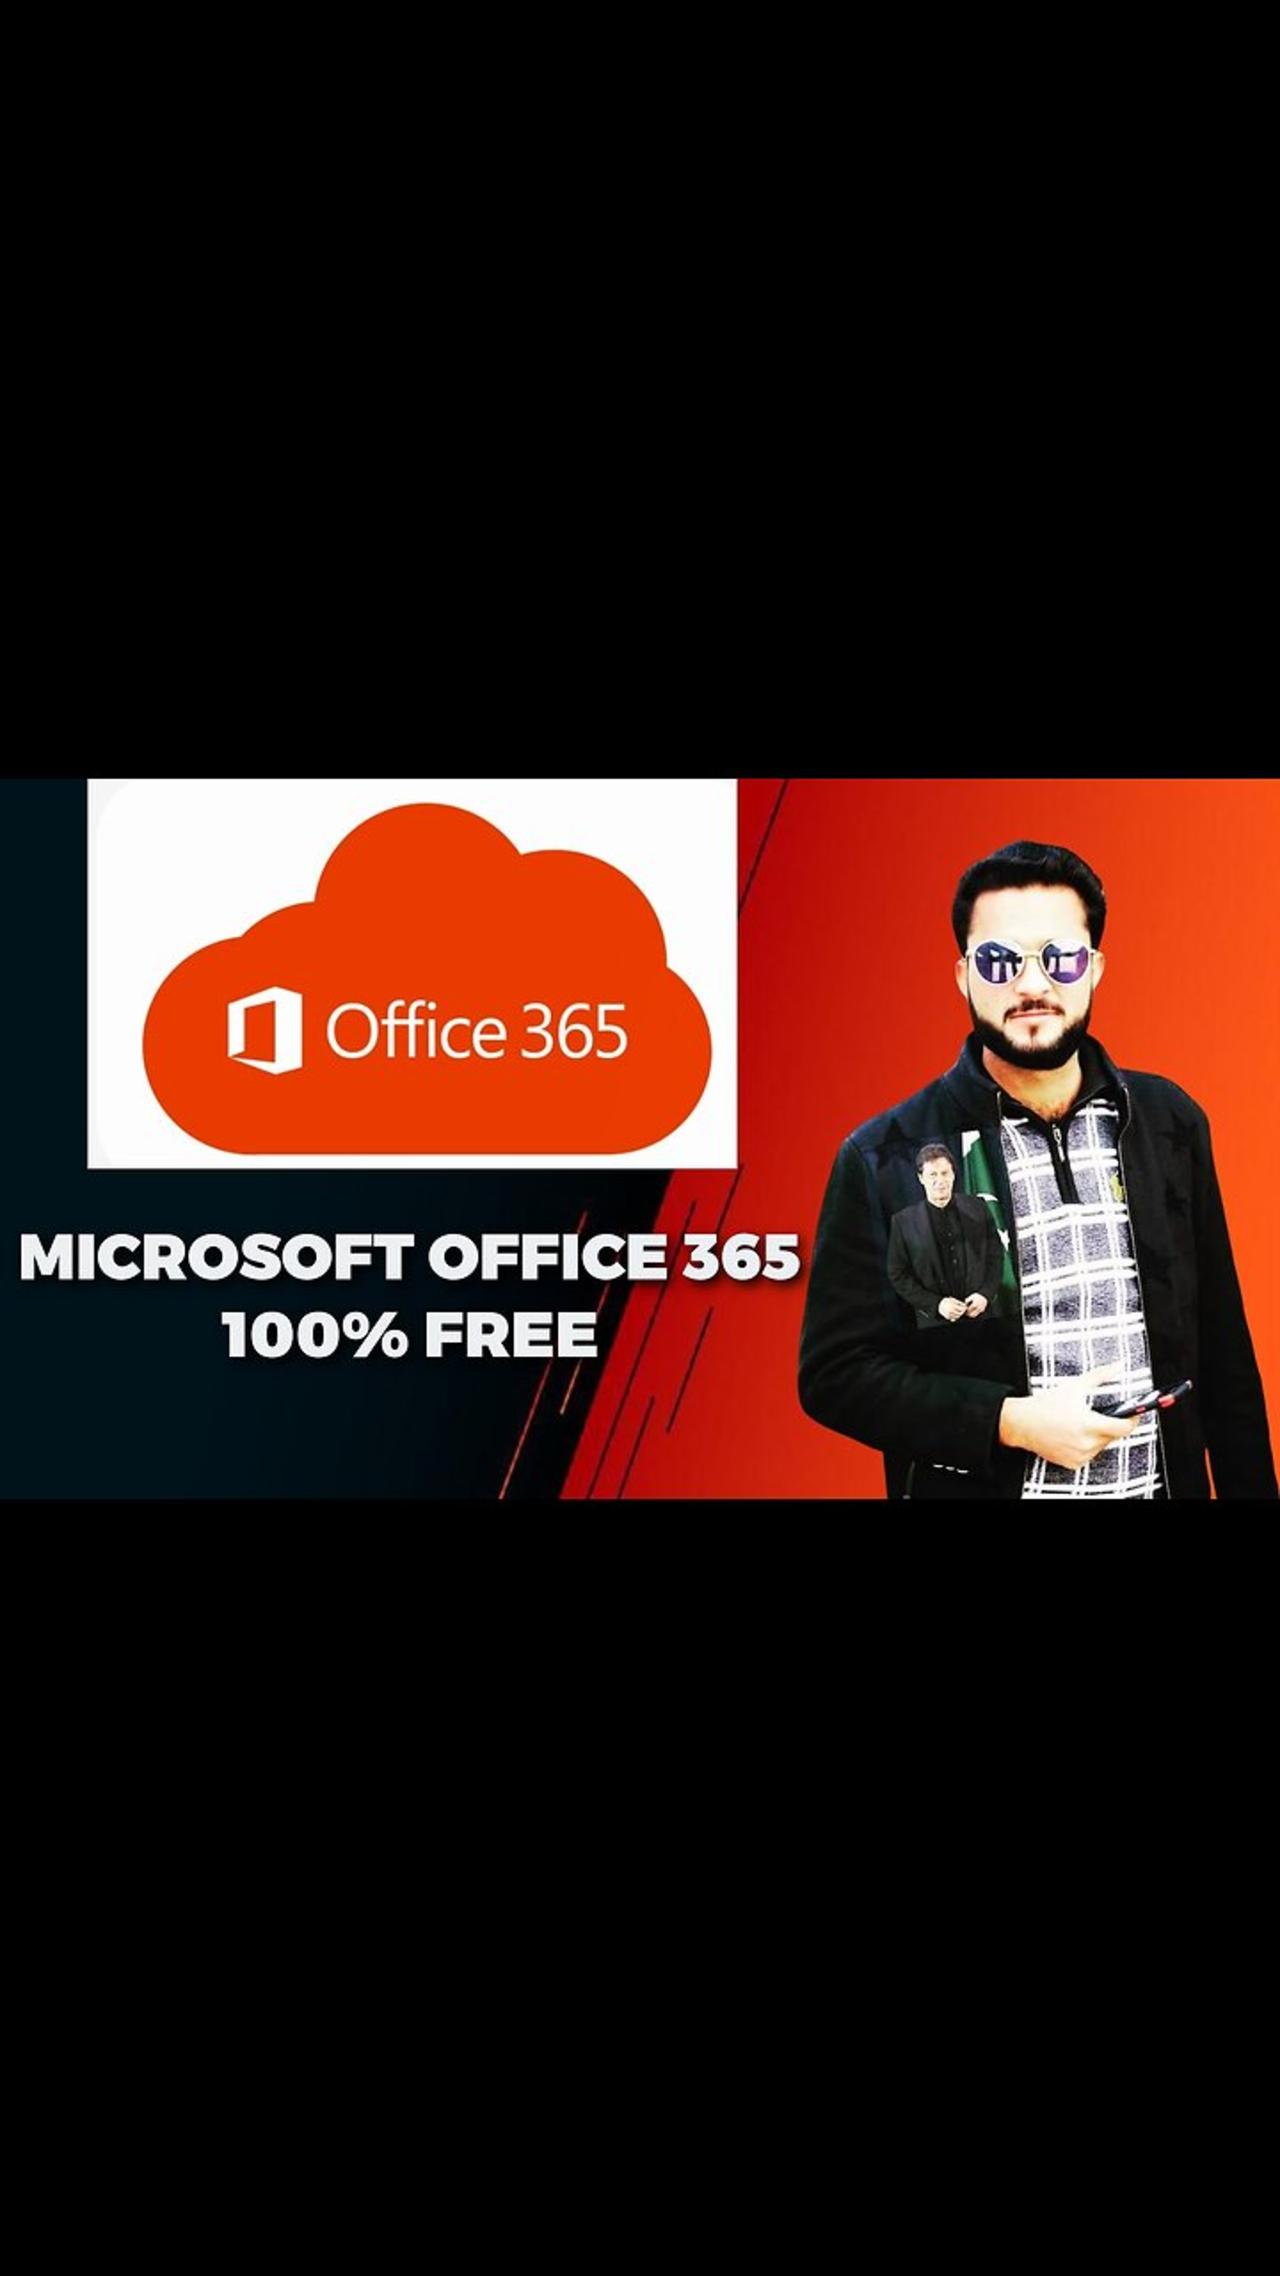 MICROSOFT OFFICE 365 FOR FREE NO DOWNLOADING OR INSTALLATION REQUIRED